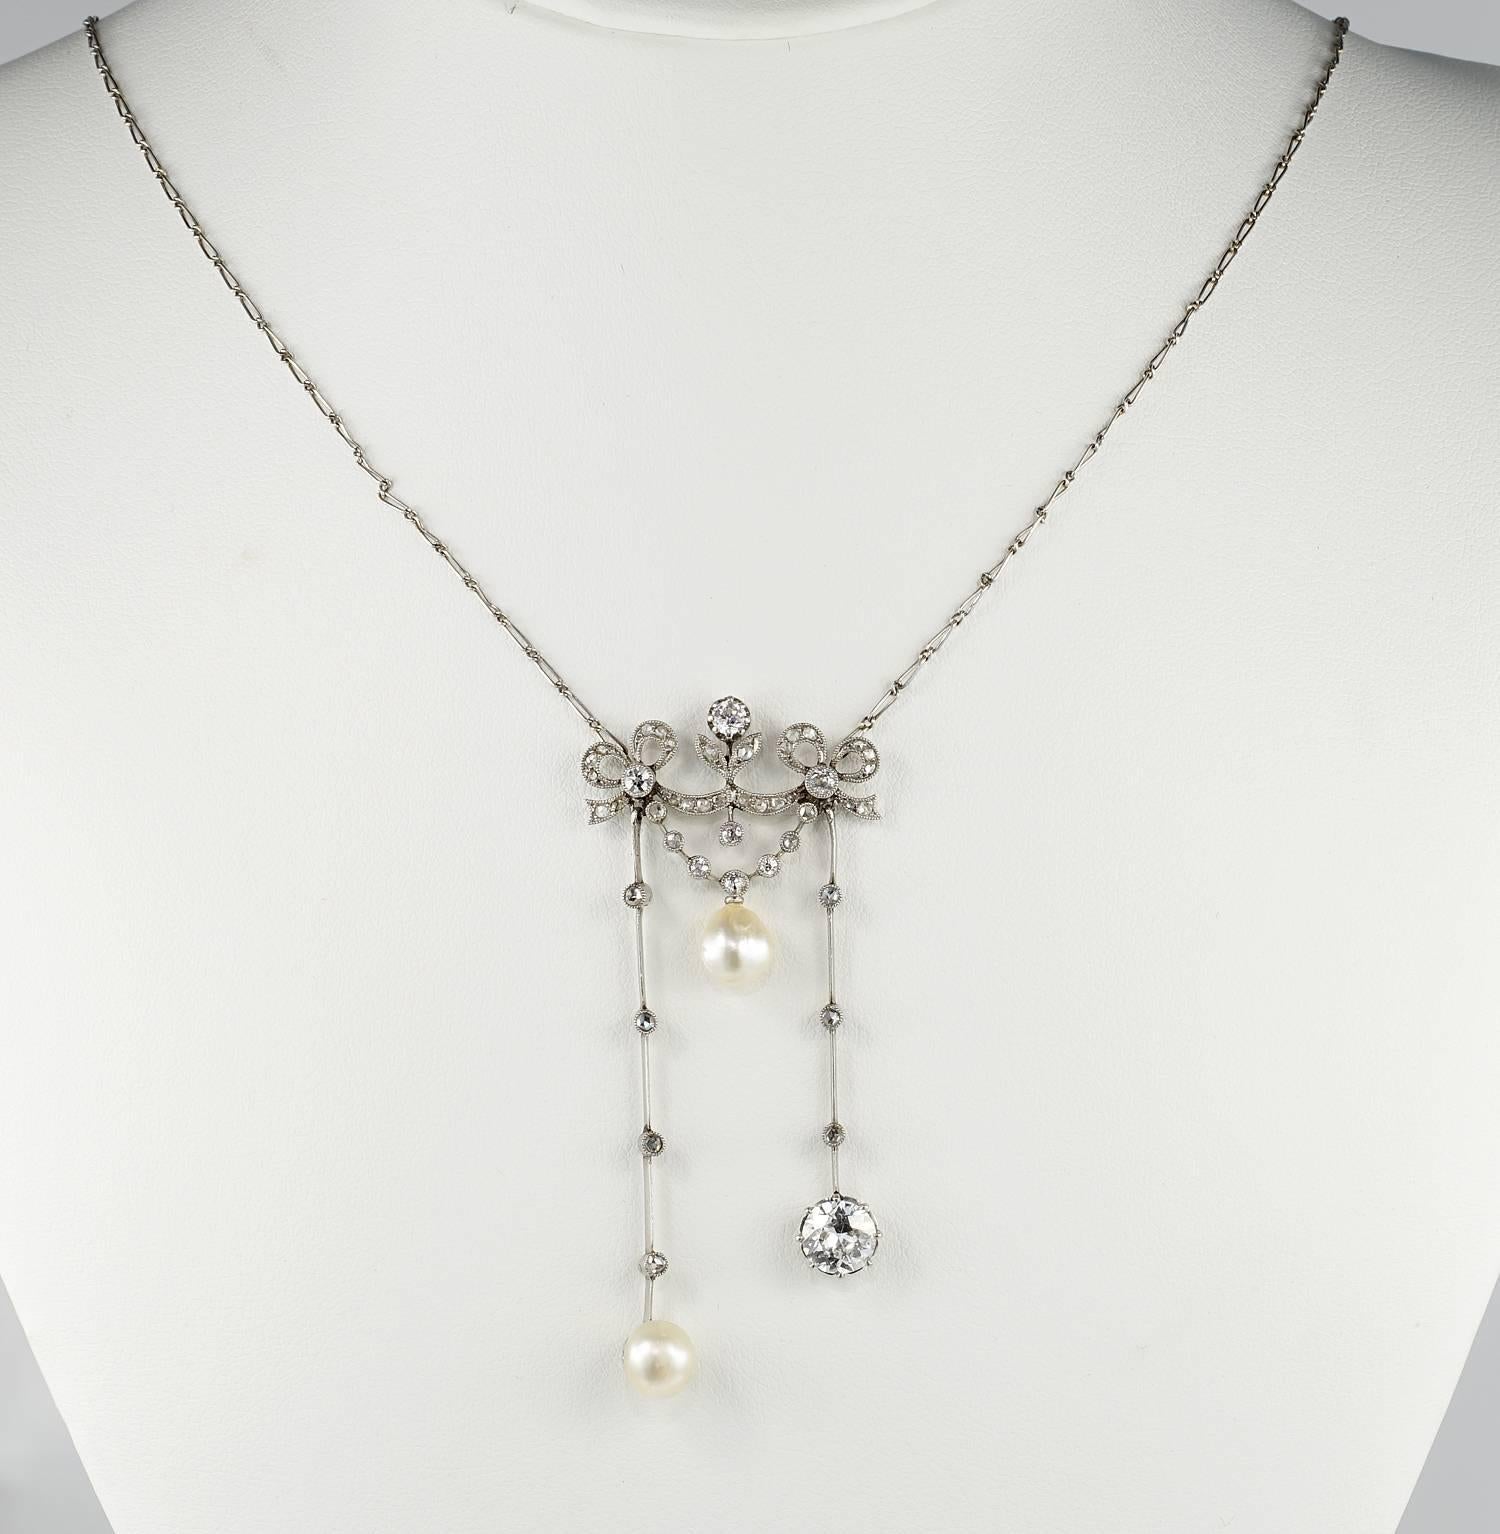 Edwardian Heirloom!

Extremely elegant and distinctive, rare Edwardian negligee of the most beautiful design and crafting, boasting magnificent NATURAL salt sea Pearls and Diamonds in an unique combination to impress now and for ever the wearer and